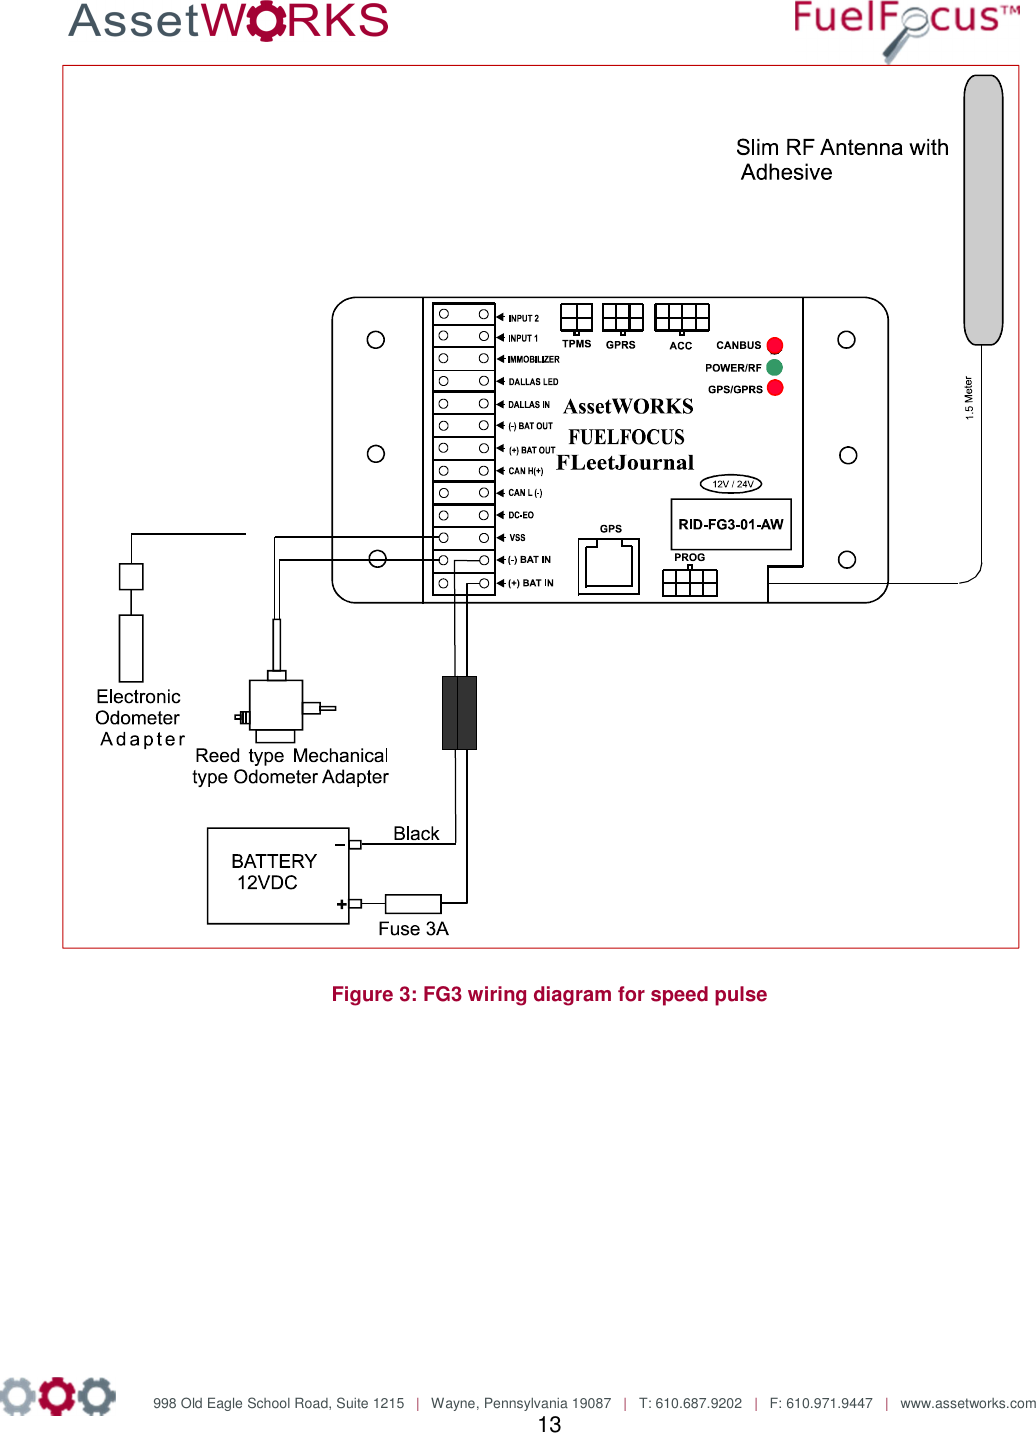               998 Old Eagle School Road, Suite 1215   |   Wayne, Pennsylvania 19087   |   T: 610.687.9202   |   F: 610.971.9447   |   www.assetworks.com 13    Figure 3: FG3 wiring diagram for speed pulse                 